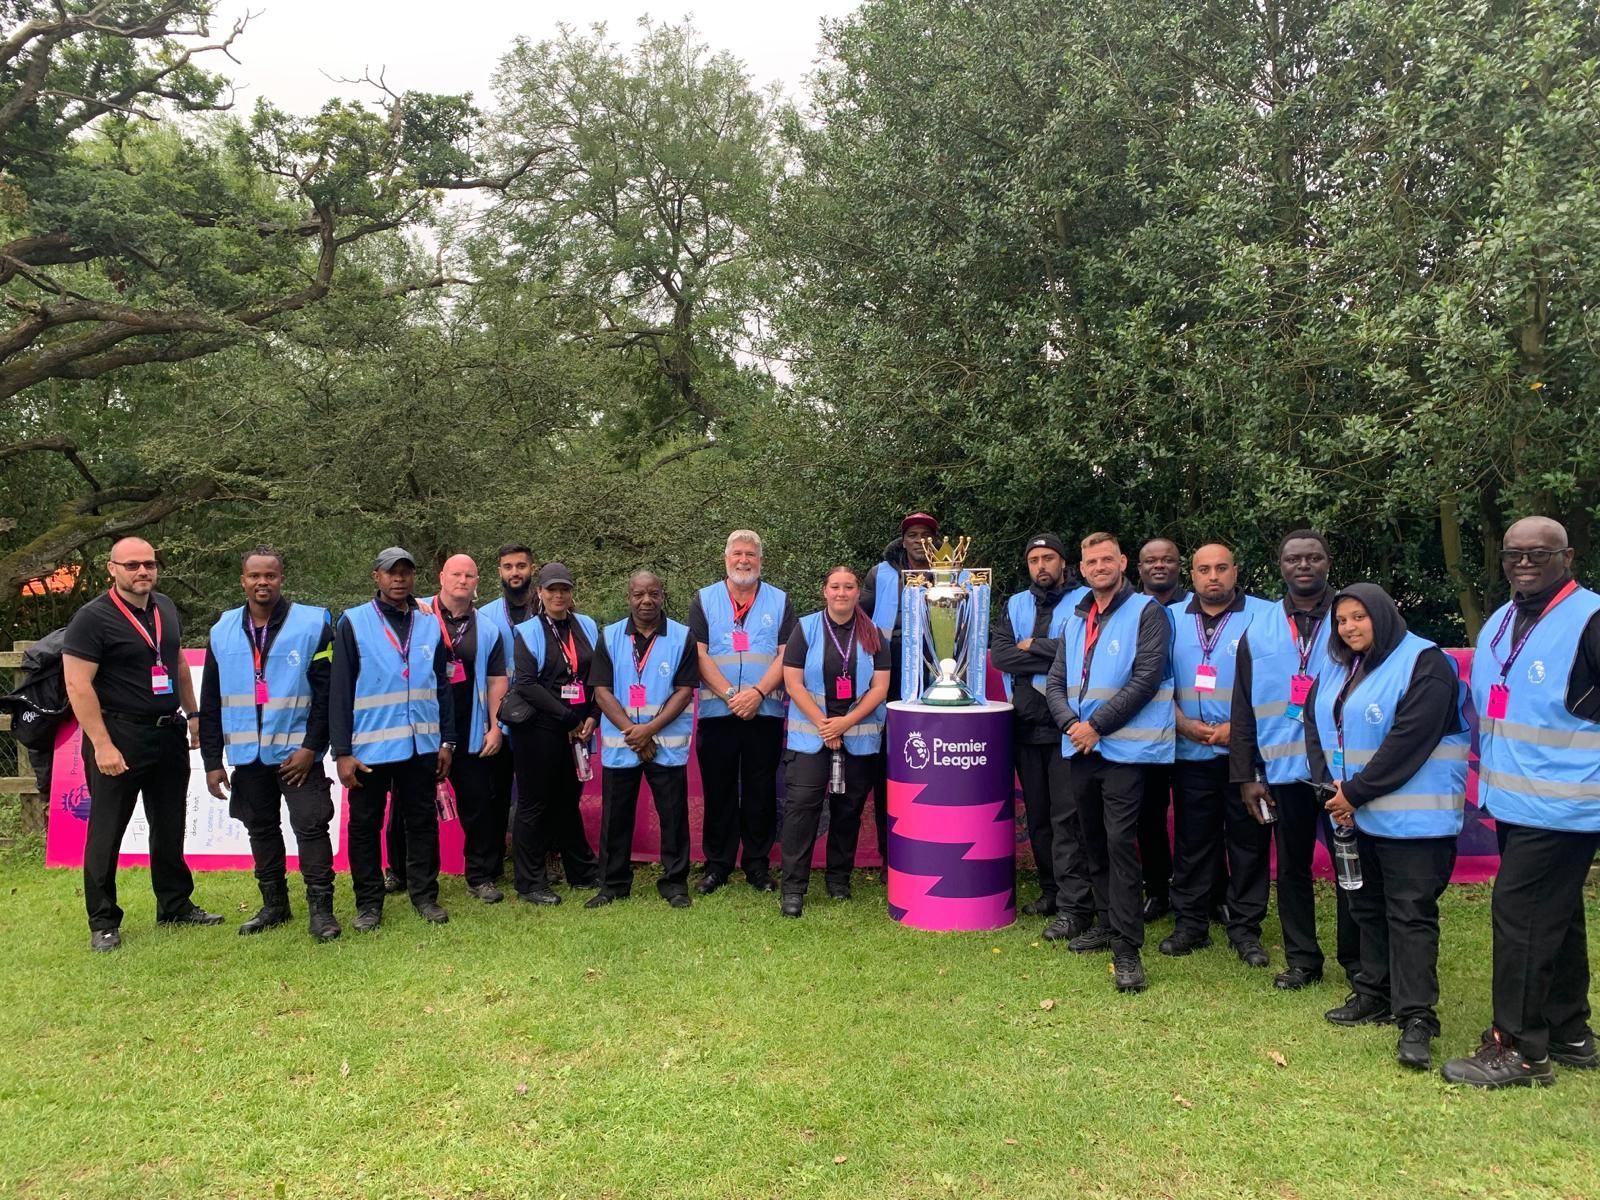 A group of people are standing in a field with a trophy.